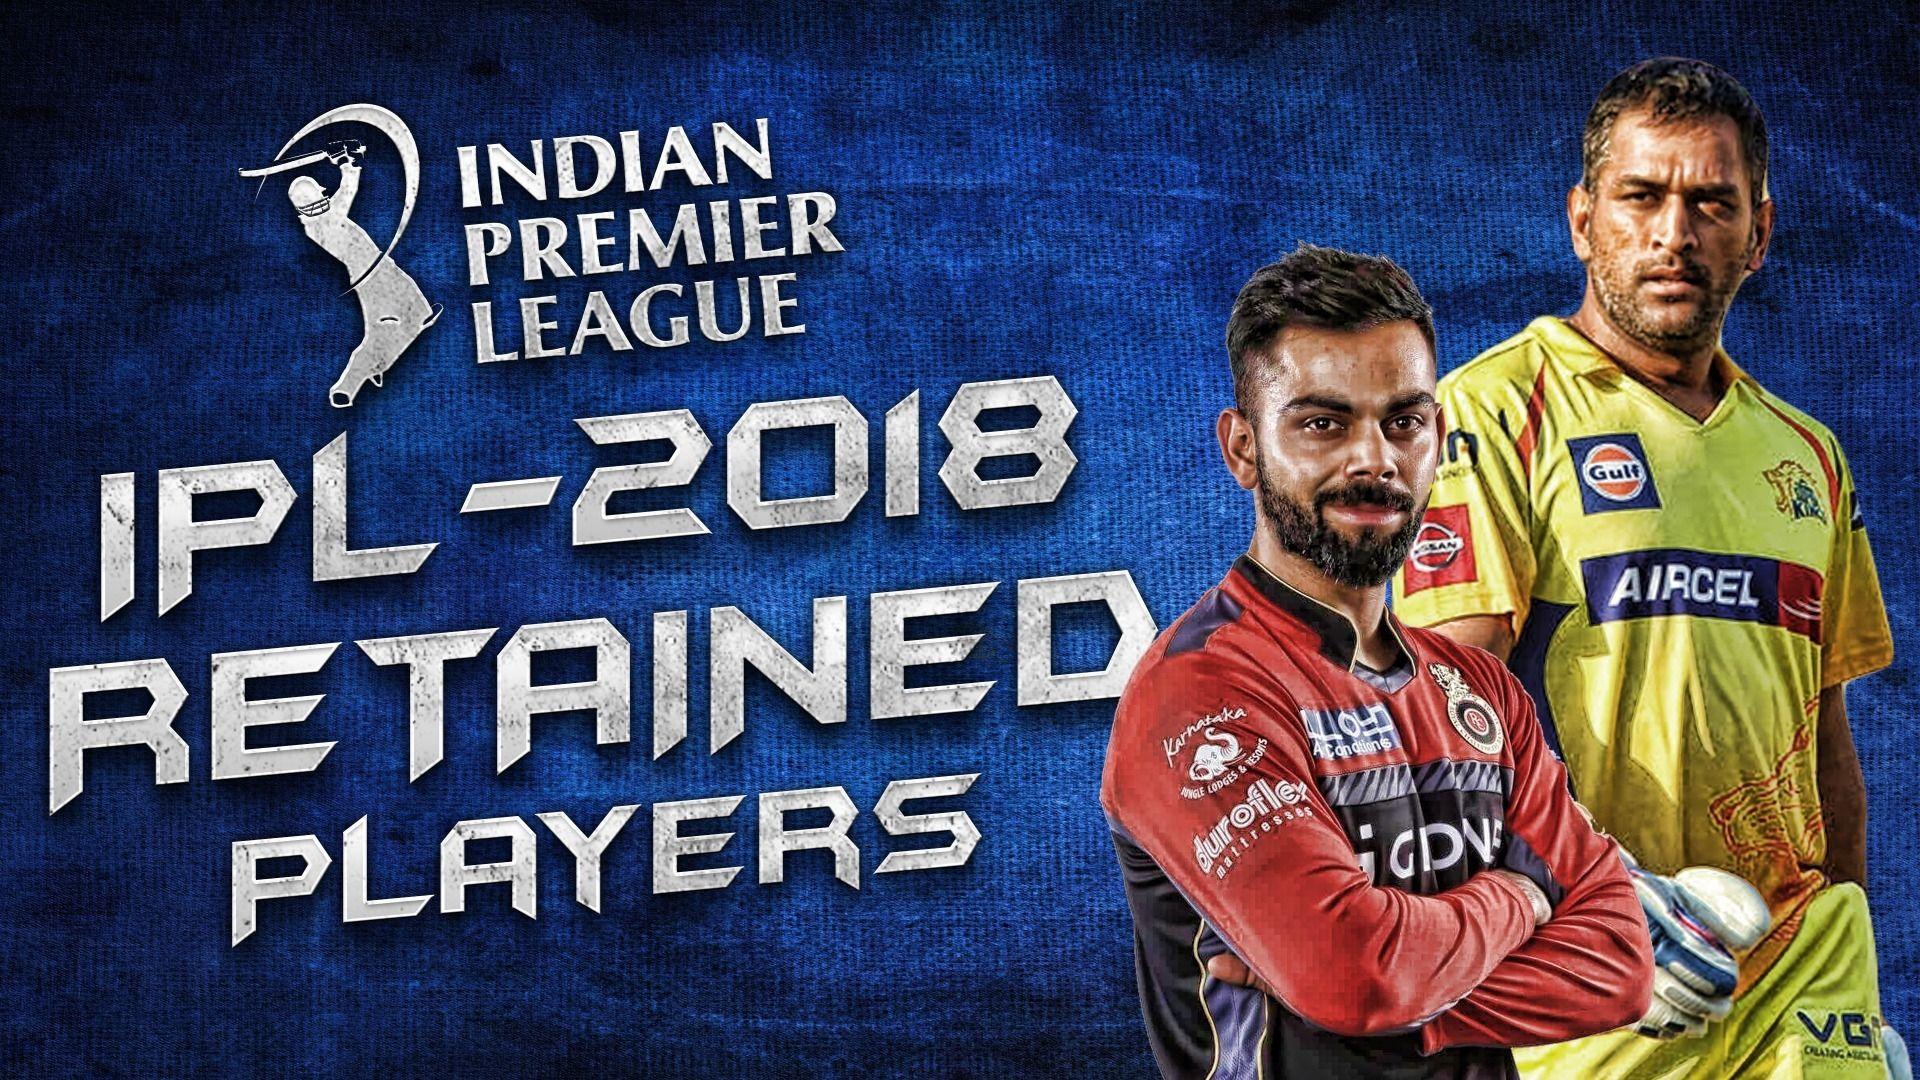 Ipl 2018 Retention: Players Who Have Been Retained By All 8 Teams